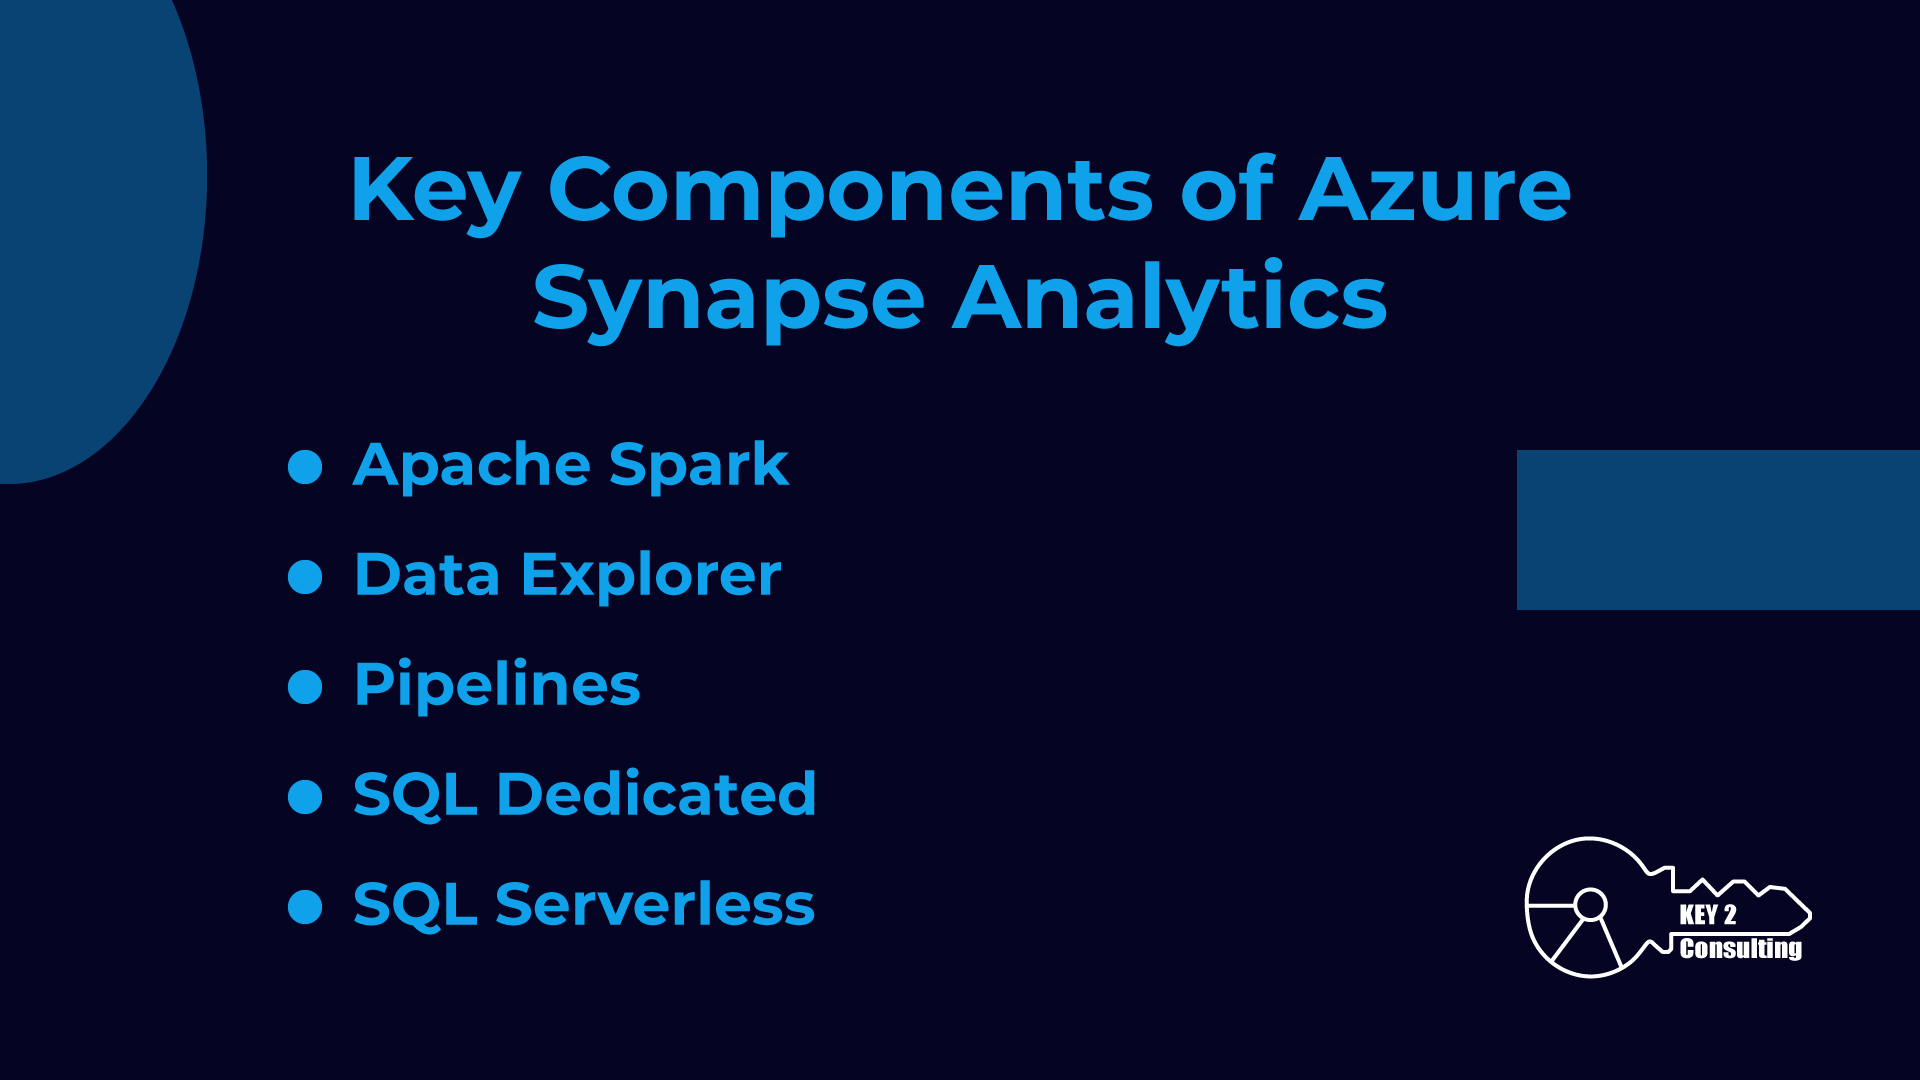 The key components of Azure Synapse Analytics are Apache Spark, Data Explorer, Pipelines, SQL Dedicated, and SQL Serverless.